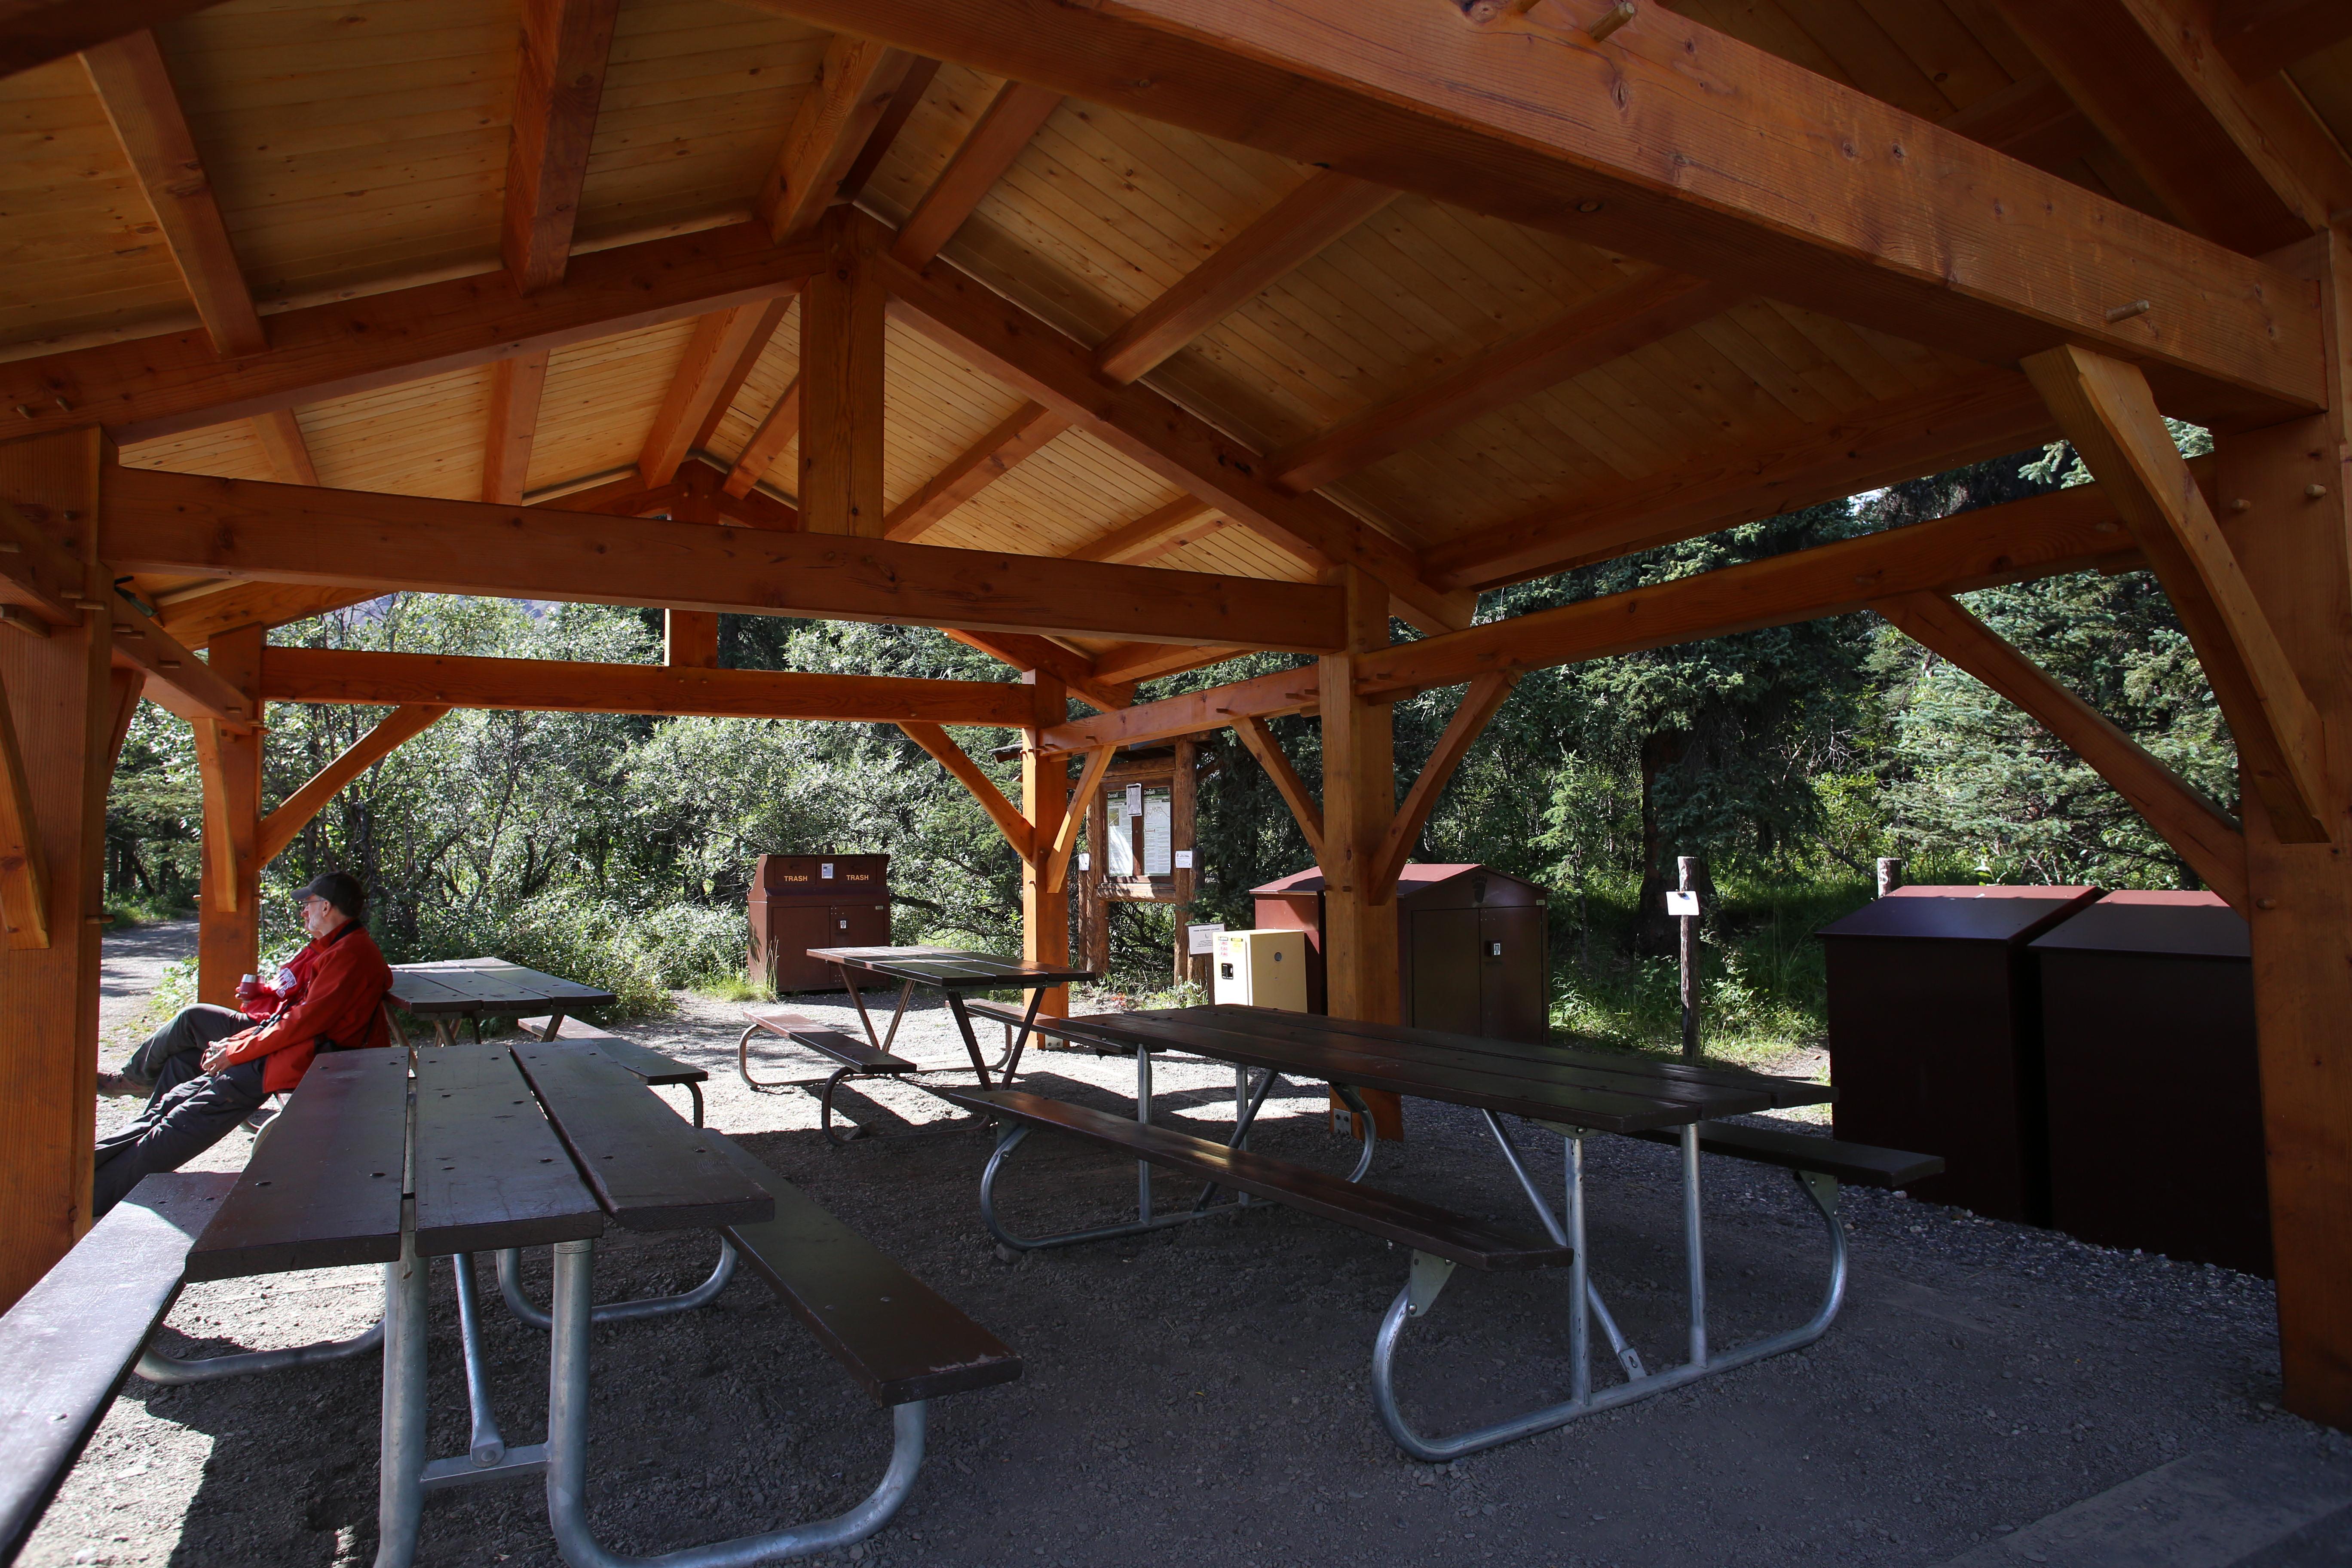 picnic tables covered by a wall-less, roofed enclosure in a forest